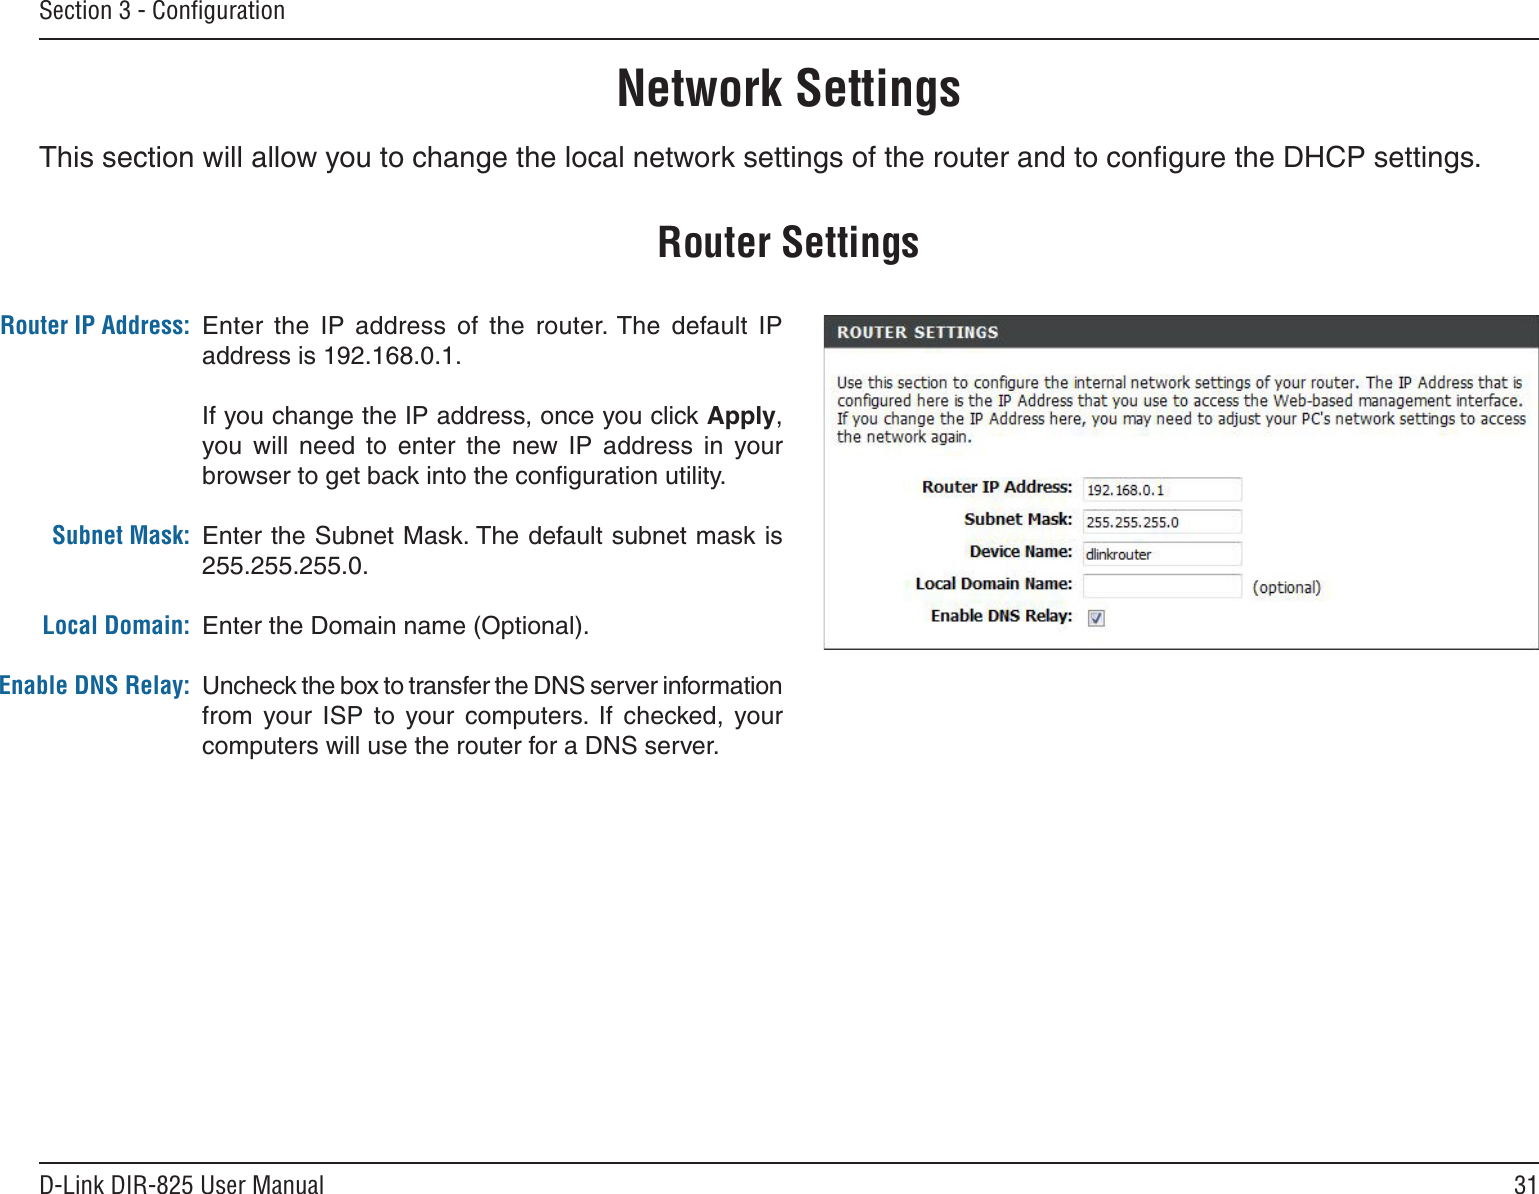 31D-Link DIR-825 User ManualSection 3 - ConﬁgurationThis section will allow you to change the local network settings of the router and to conﬁgure the DHCP settings.Network SettingsEnter  the  IP  address  of  the  router. The  default  IP address is 192.168.0.1.If you change the IP address, once you click Apply, you will  need  to  enter  the  new  IP  address  in  your browser to get back into the conﬁguration utility.Enter the Subnet Mask. The default subnet mask is 255.255.255.0.Enter the Domain name (Optional).Uncheck the box to transfer the DNS server information from  your  ISP  to  your  computers.  If  checked,  your computers will use the router for a DNS server.Router IP Address:Subnet Mask:Local Domain:Enable DNS Relay:Router Settings